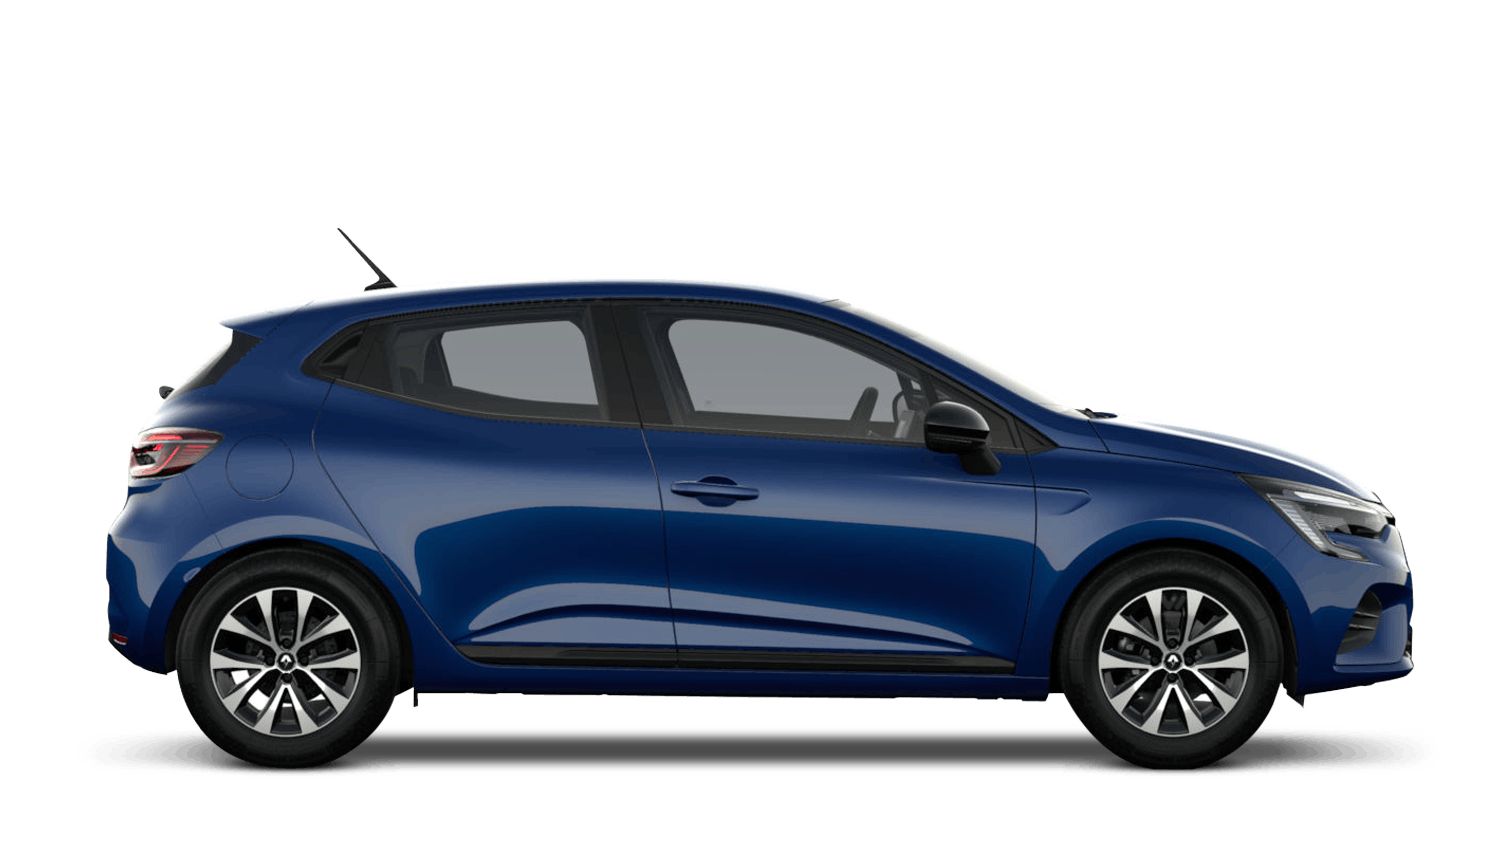 Renault CLIO TCE Range | Save up to £879 & £1,500 Deposit Contribution